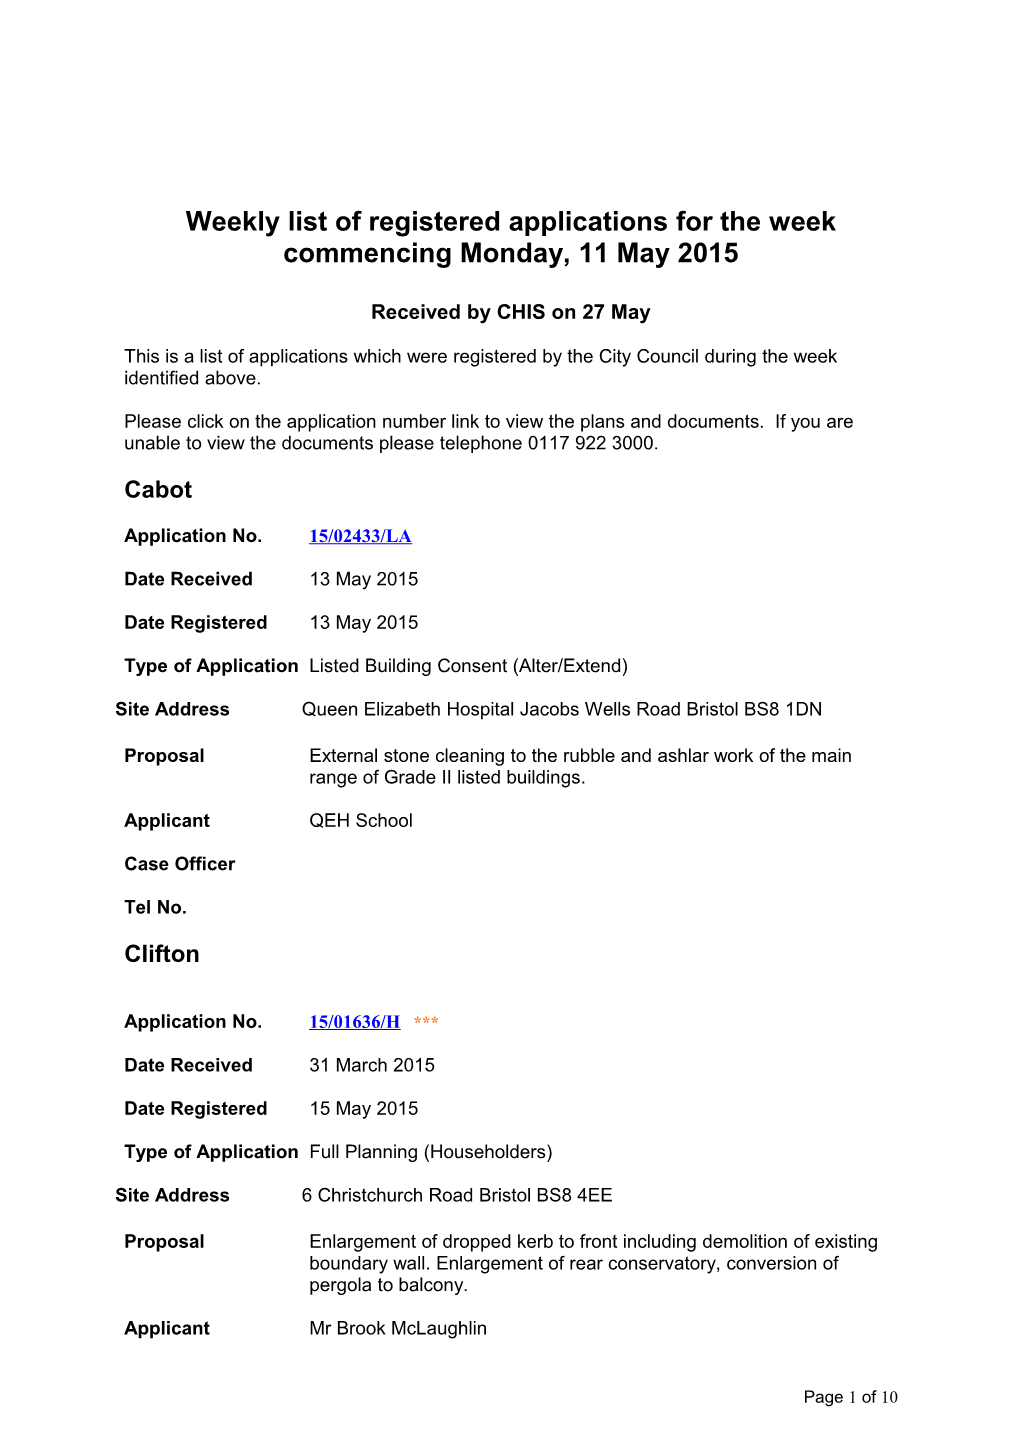 Weekly List of Registered Applications for the Week Commencing Monday, 11 May 2015